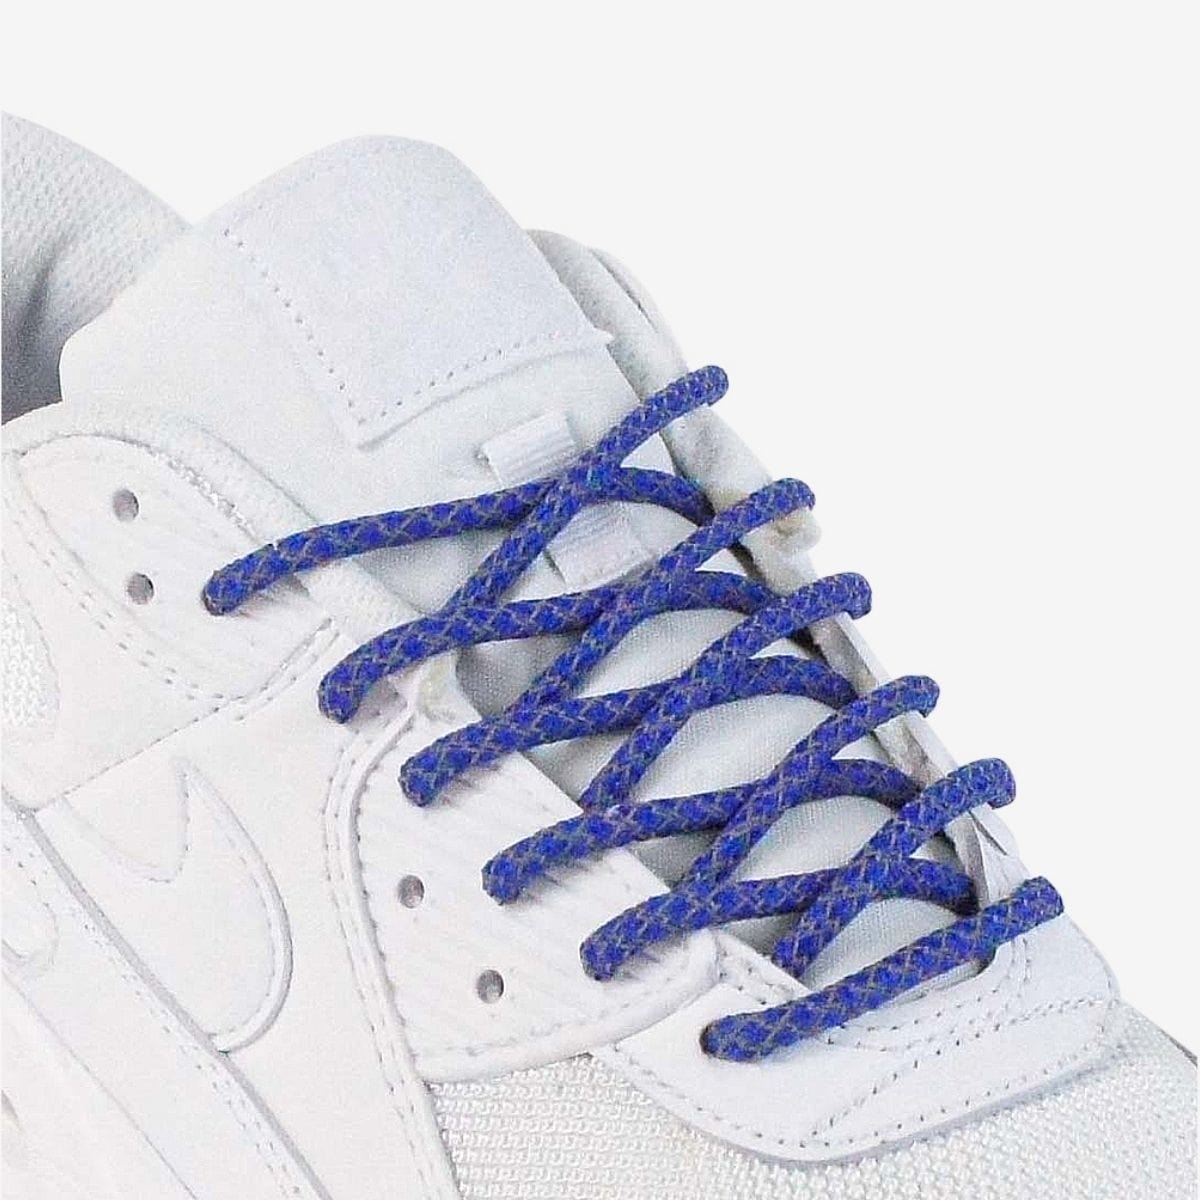 custom-color-shoelaces-on-white-sneakers-with-reflective-royal-blue-laces